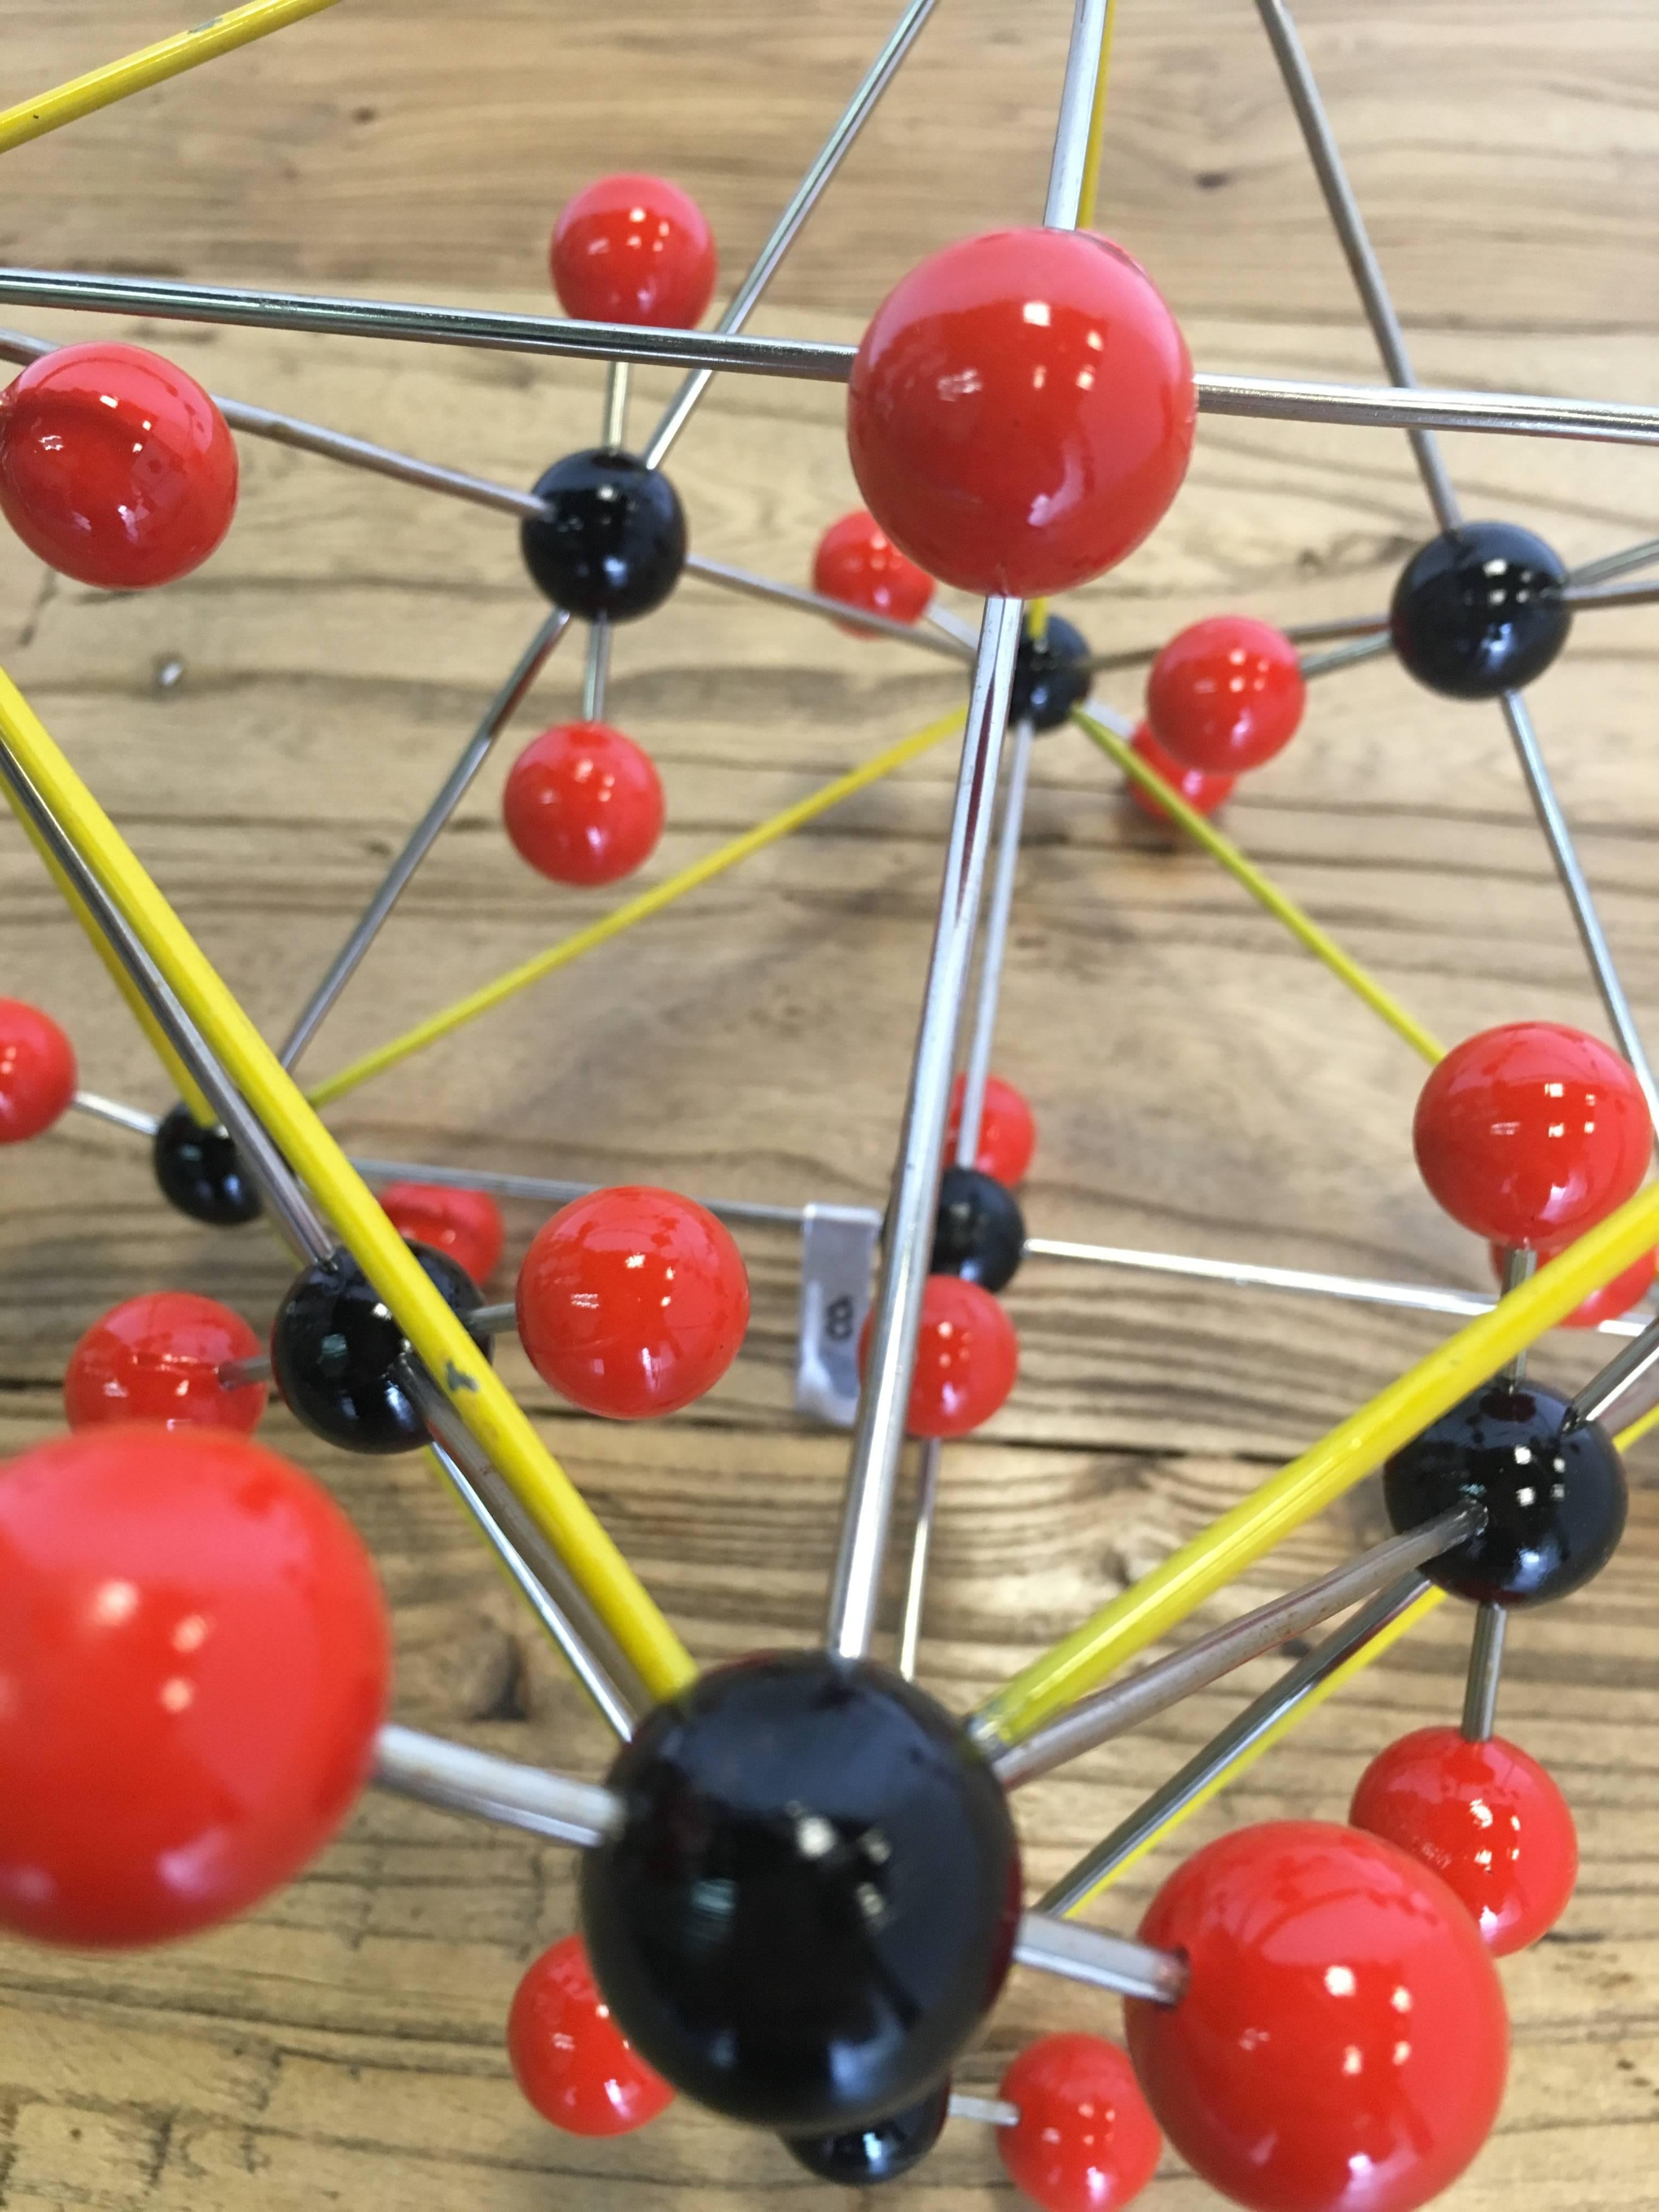 Vintage ball and stick molecular model depicting elemental structure of carbon dioxide, circa 1950s.